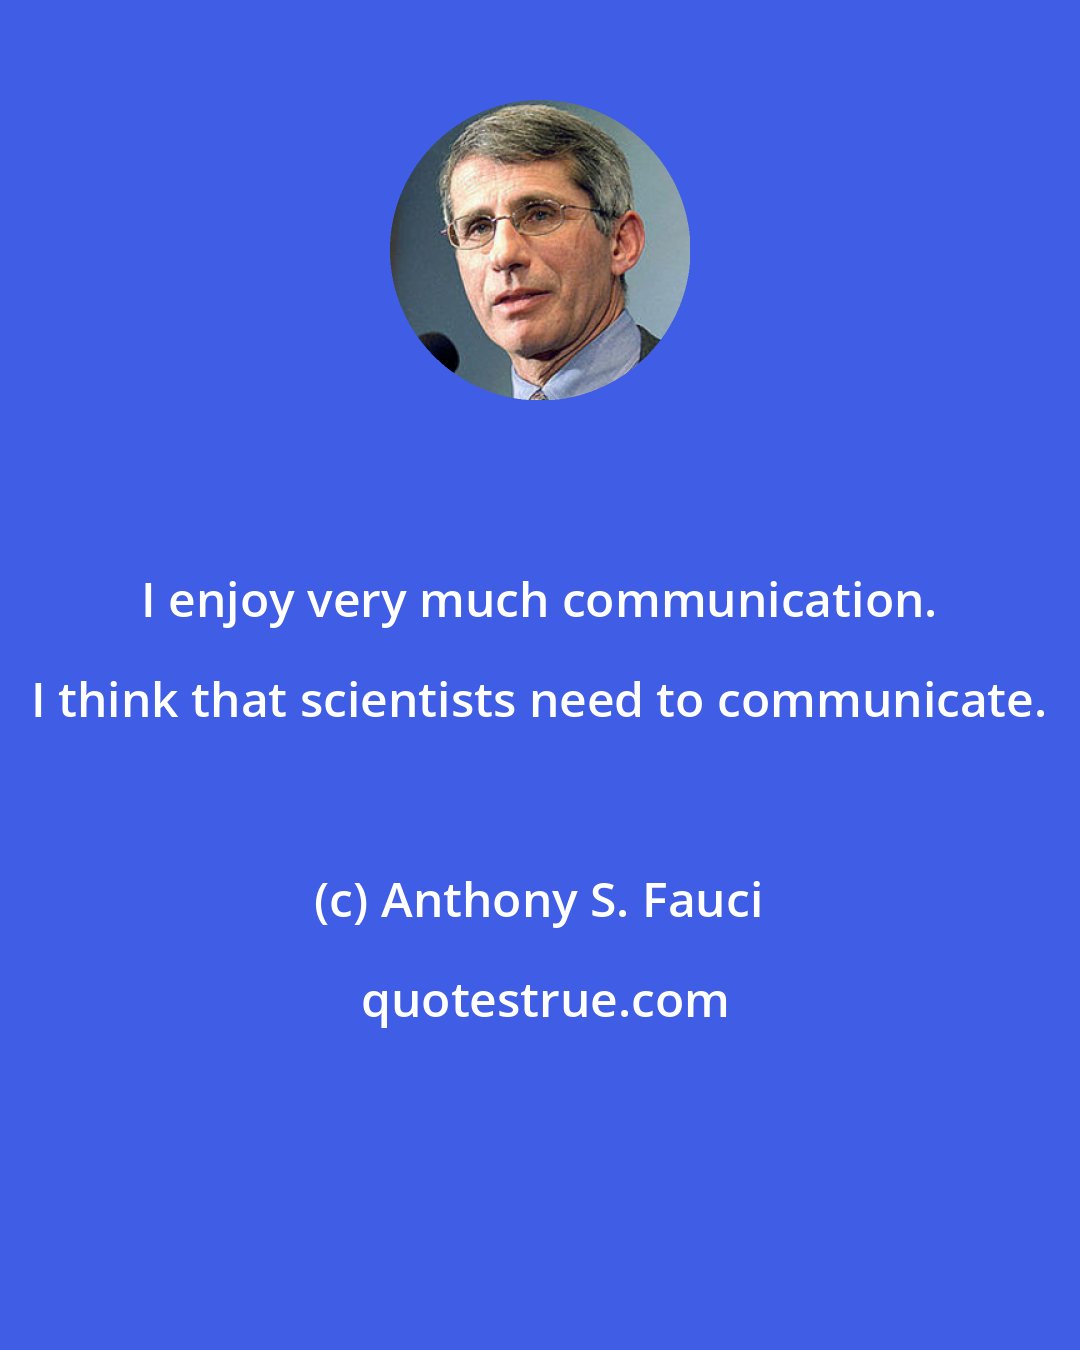 Anthony S. Fauci: I enjoy very much communication. I think that scientists need to communicate.